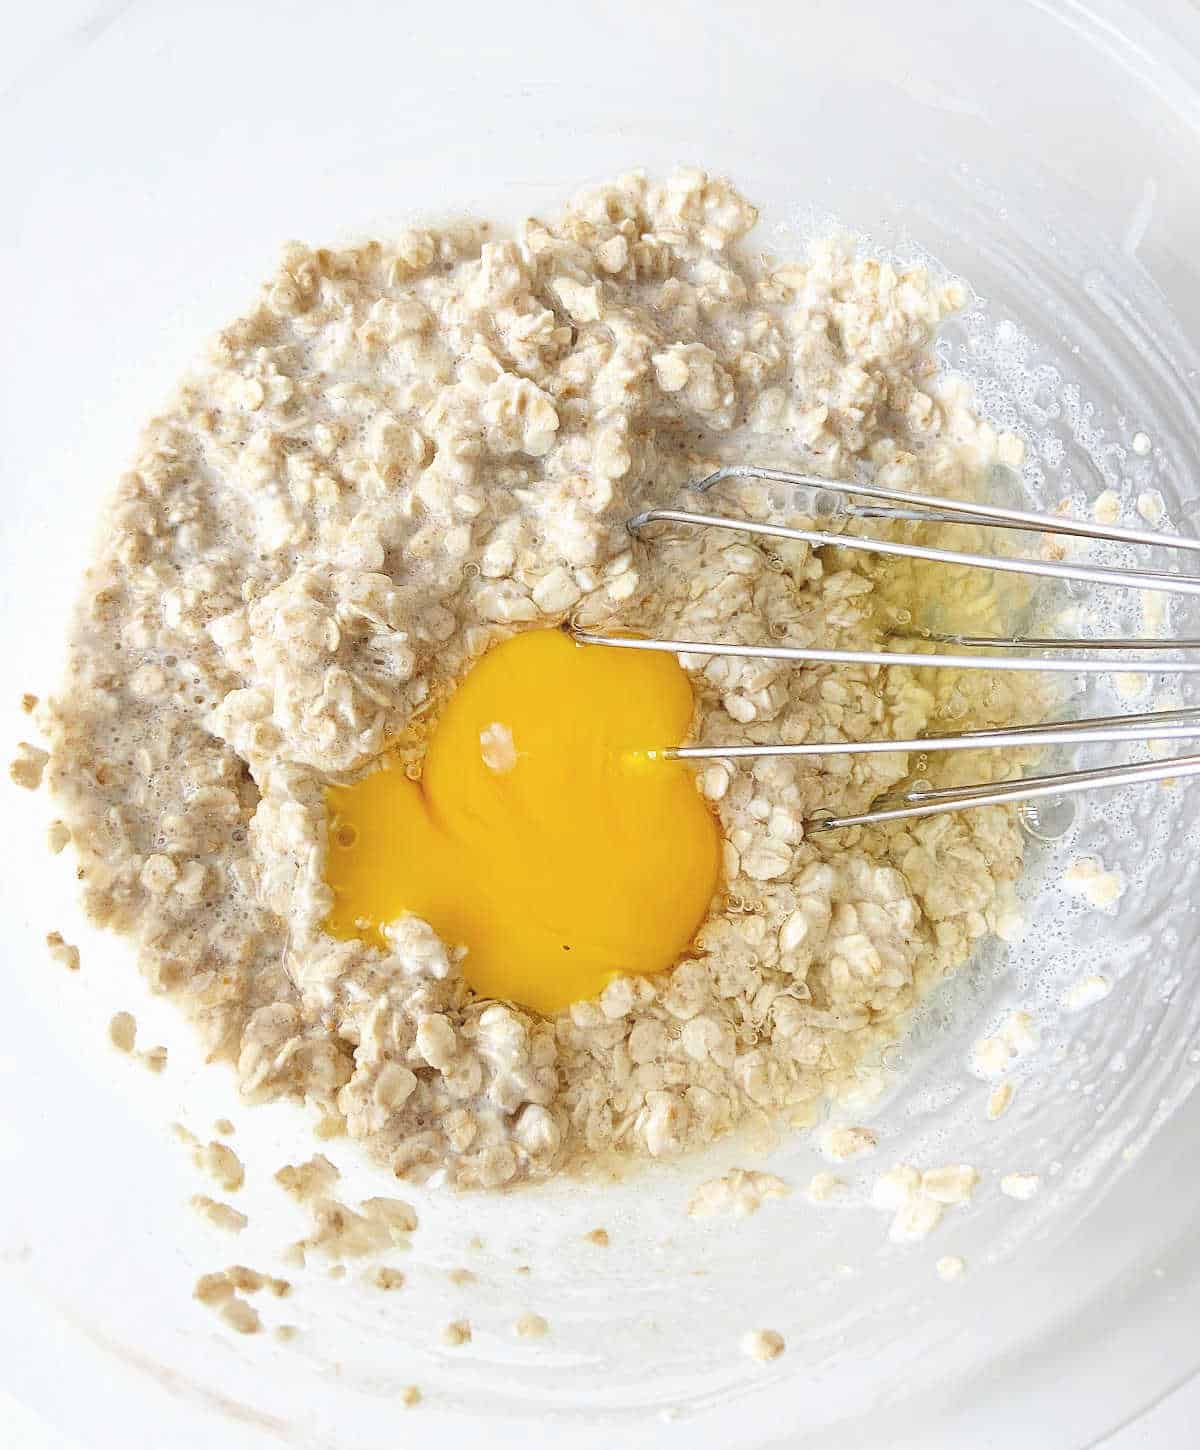 Eggs added to oatmeal muffin mixture in glass bowl with a whisk inside.